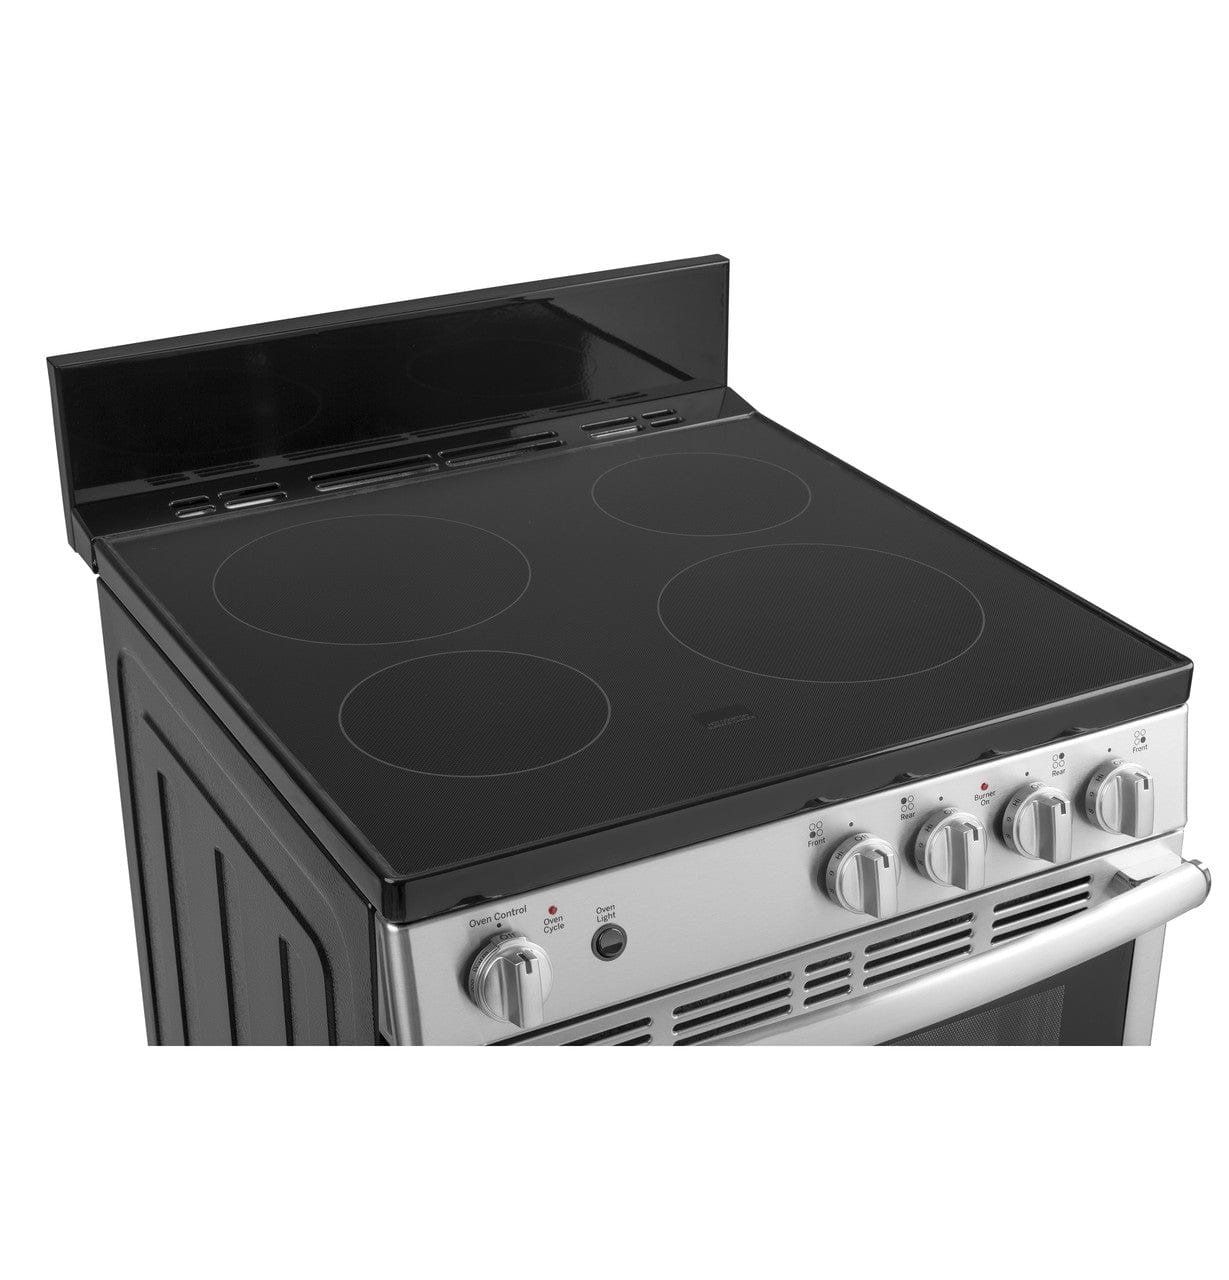 GE JCAS640RMSS Range, 24" Exterior Width, Electric Range, Glass Burners (Electric), 4 Burners, 2.9 cu. ft. Capacity, Storage Drawer, 1 Ovens, 2000W, Front Controls, Stainless Steel colour